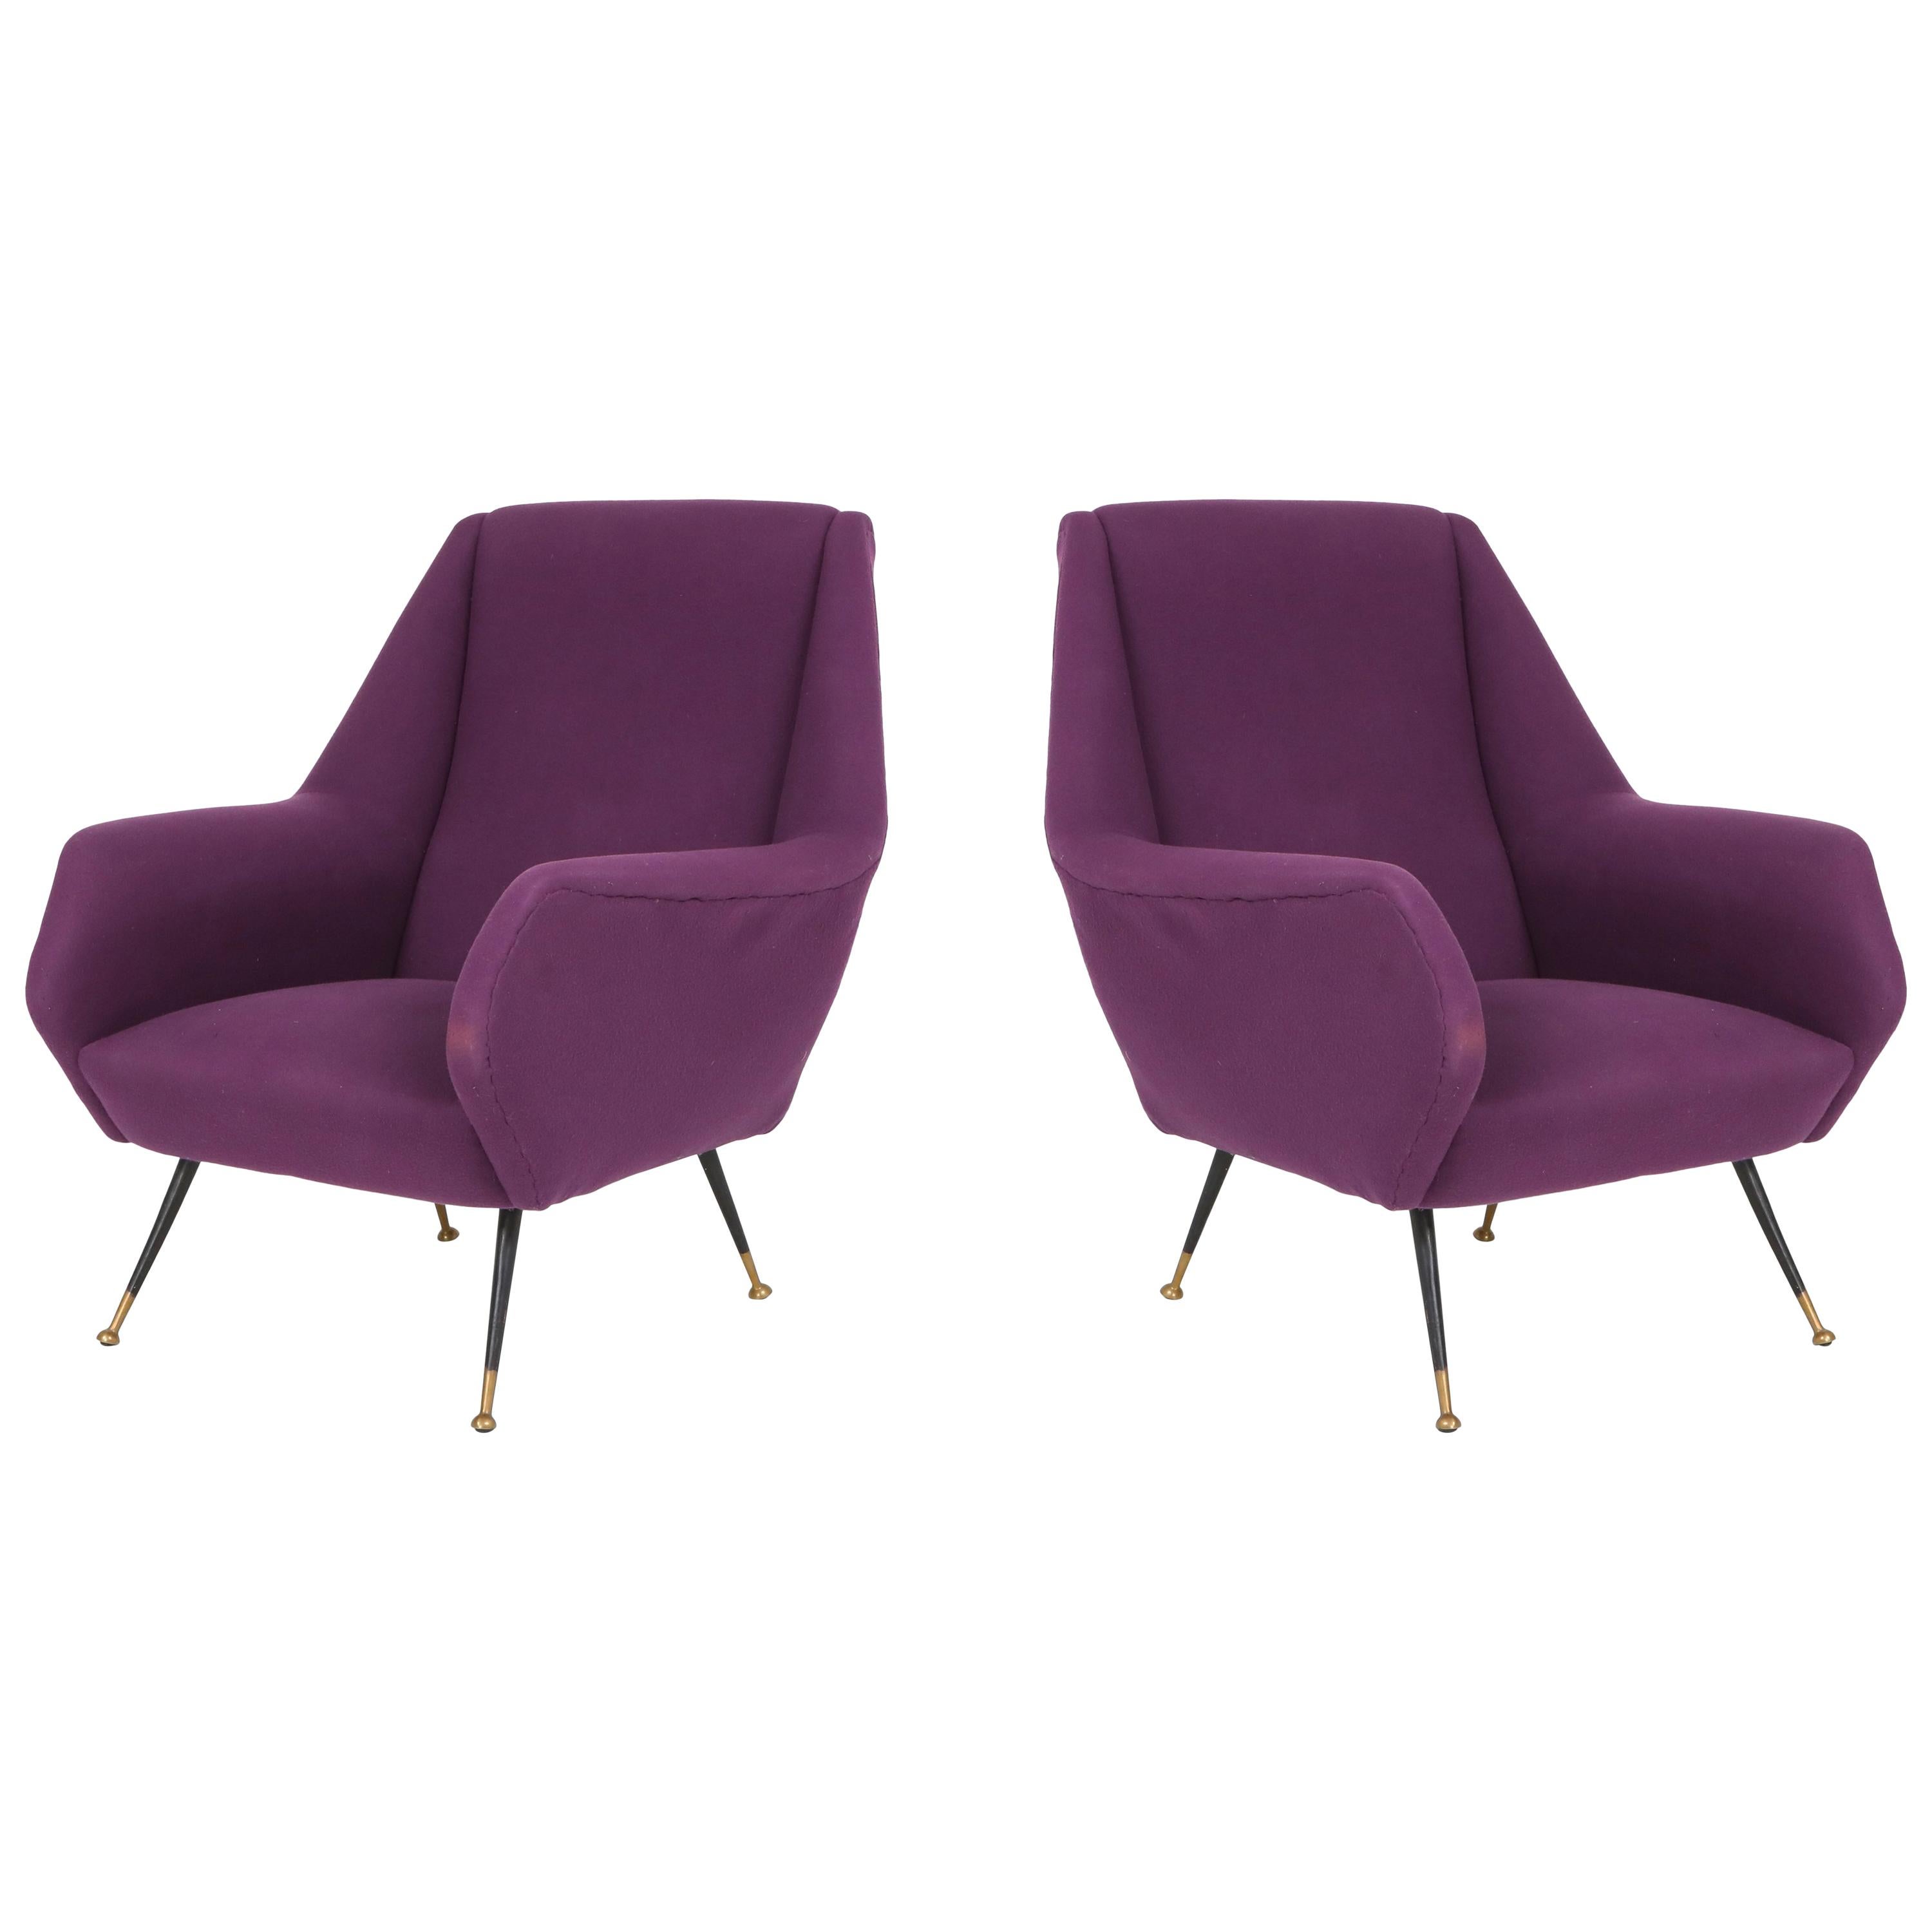 Ico Parisi Easy Chairs with Purple Upholstery